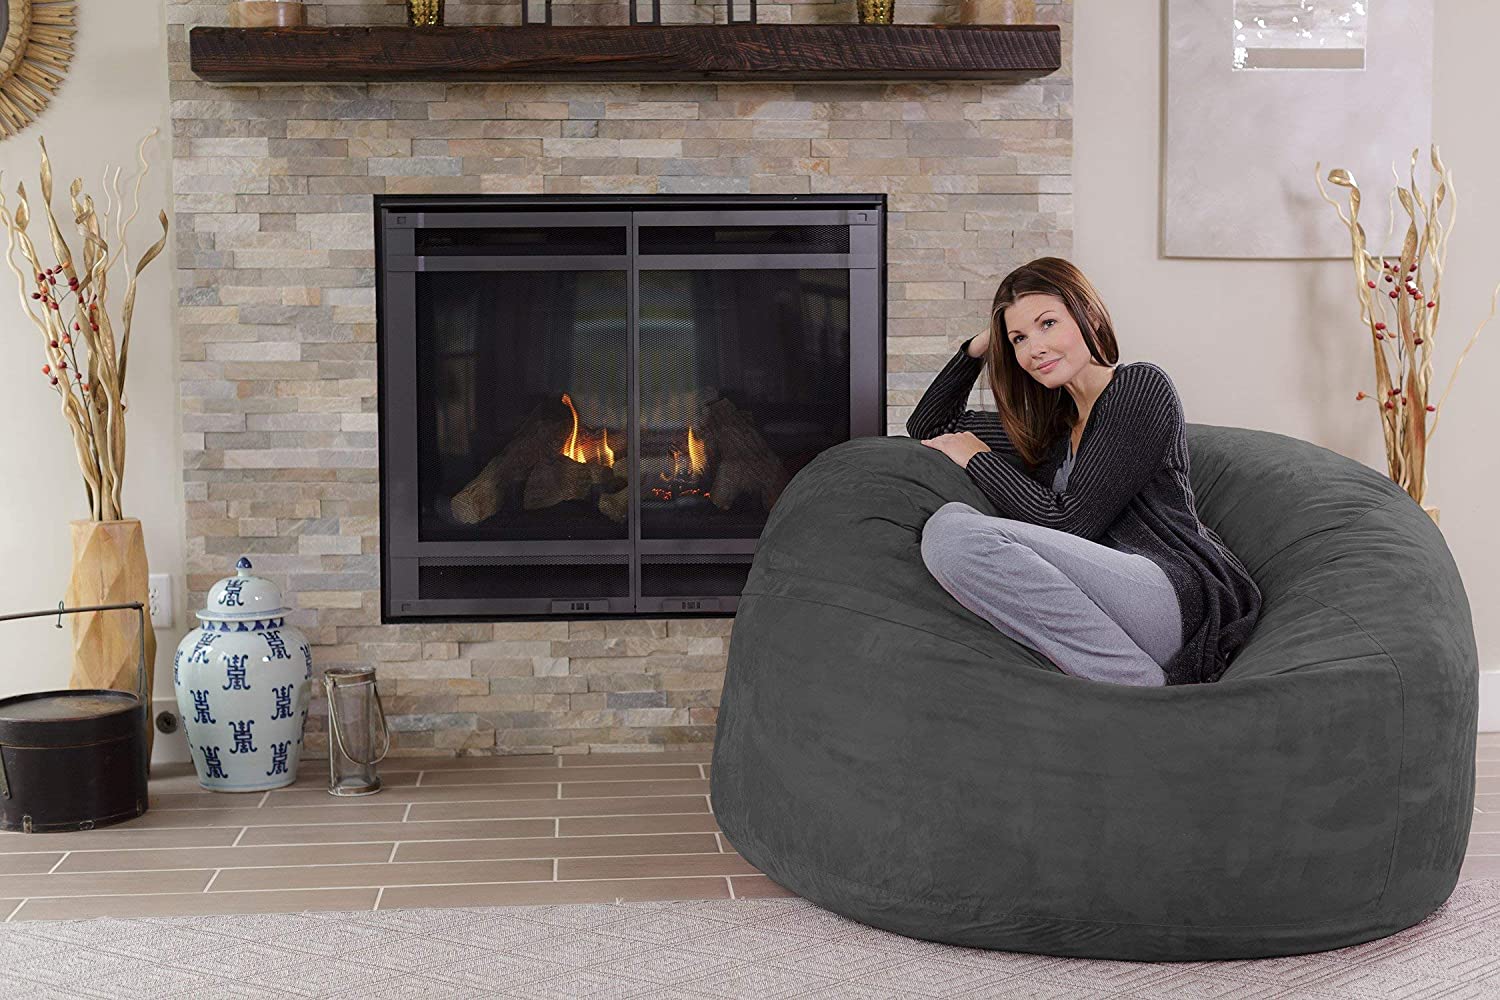 Bonkers PU Leather Chill Bean Bag with Beans Filling Black 90 x 177 x 30 cm 1-Piece 